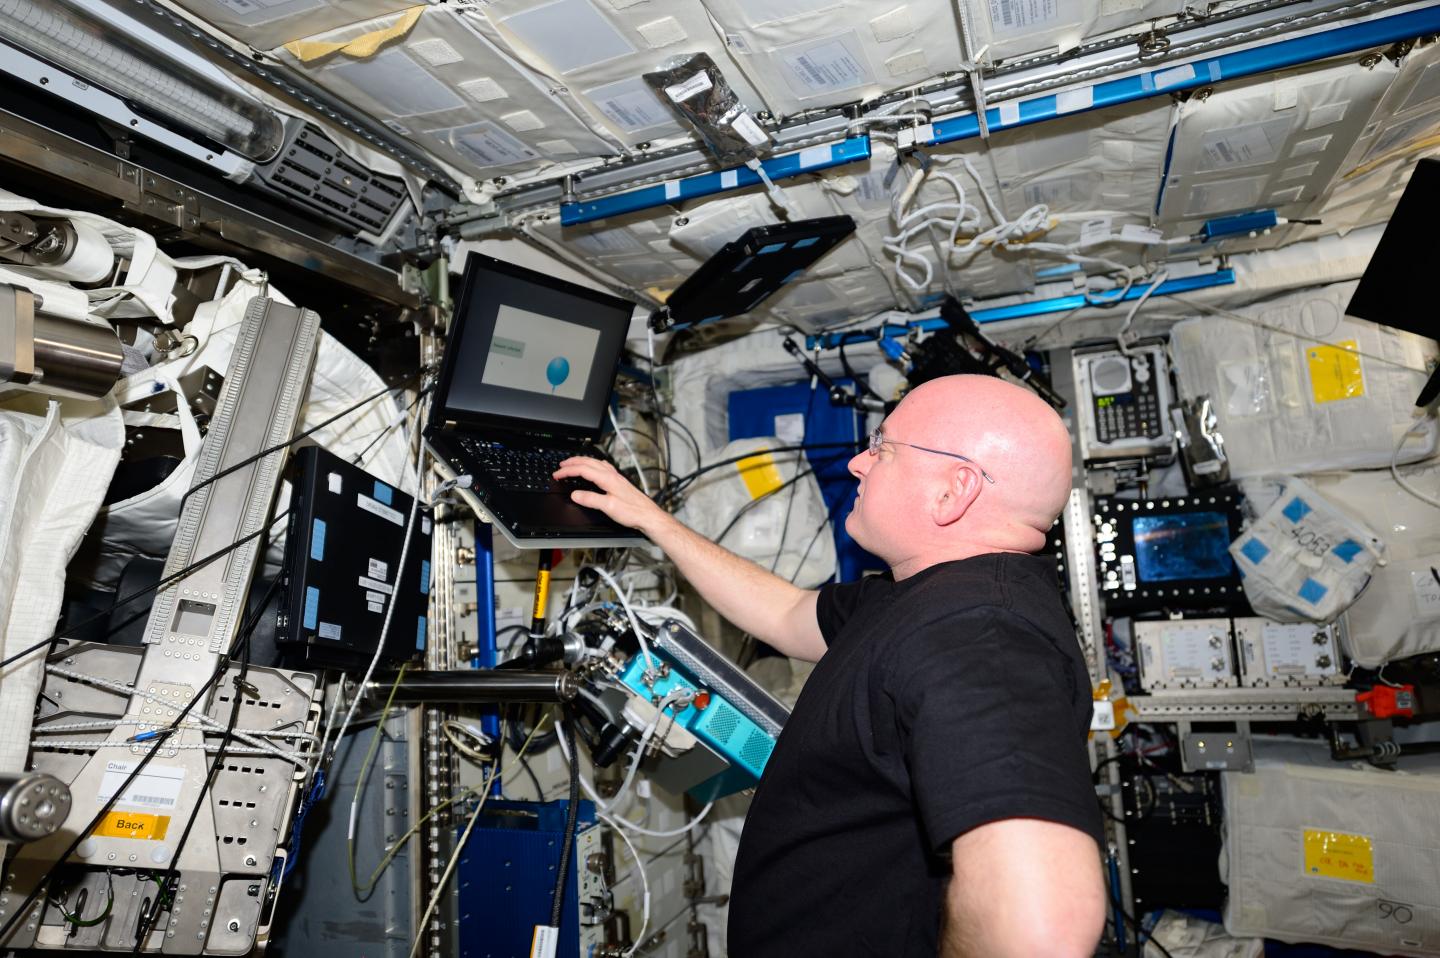 Astronaut Scott Kelly Cognitive Test in Space